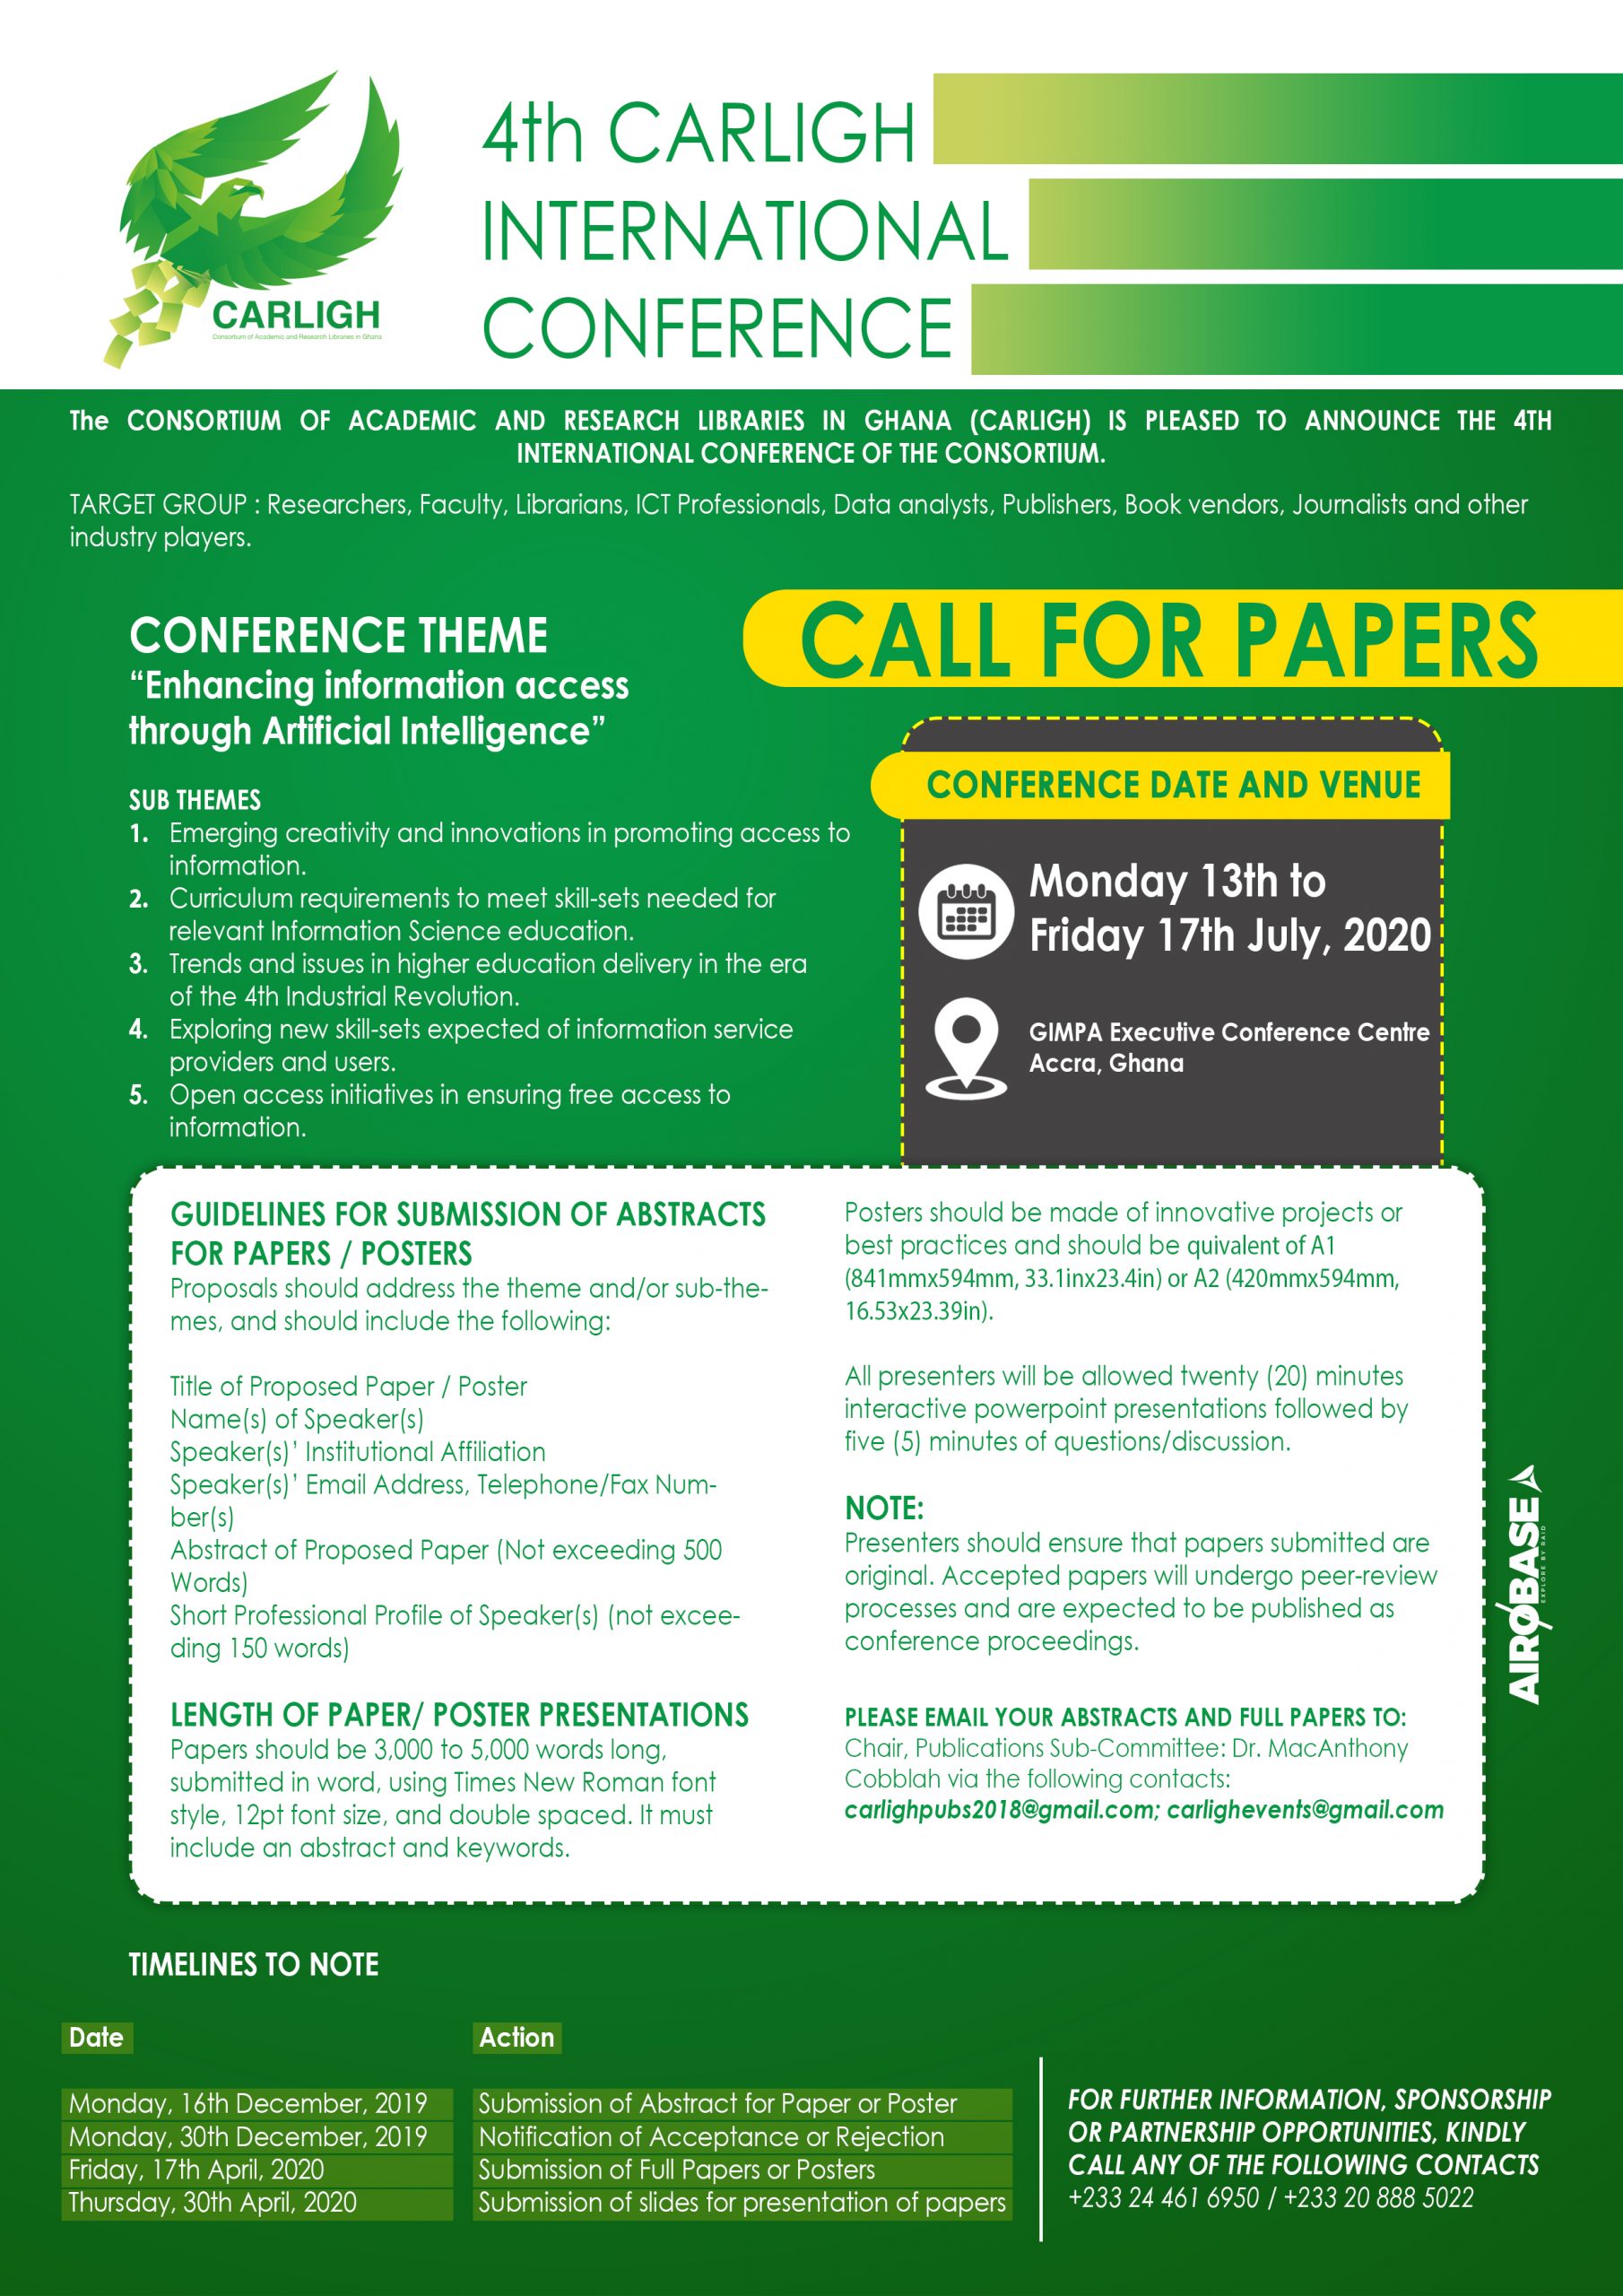 Call for Papers - CARLIGH